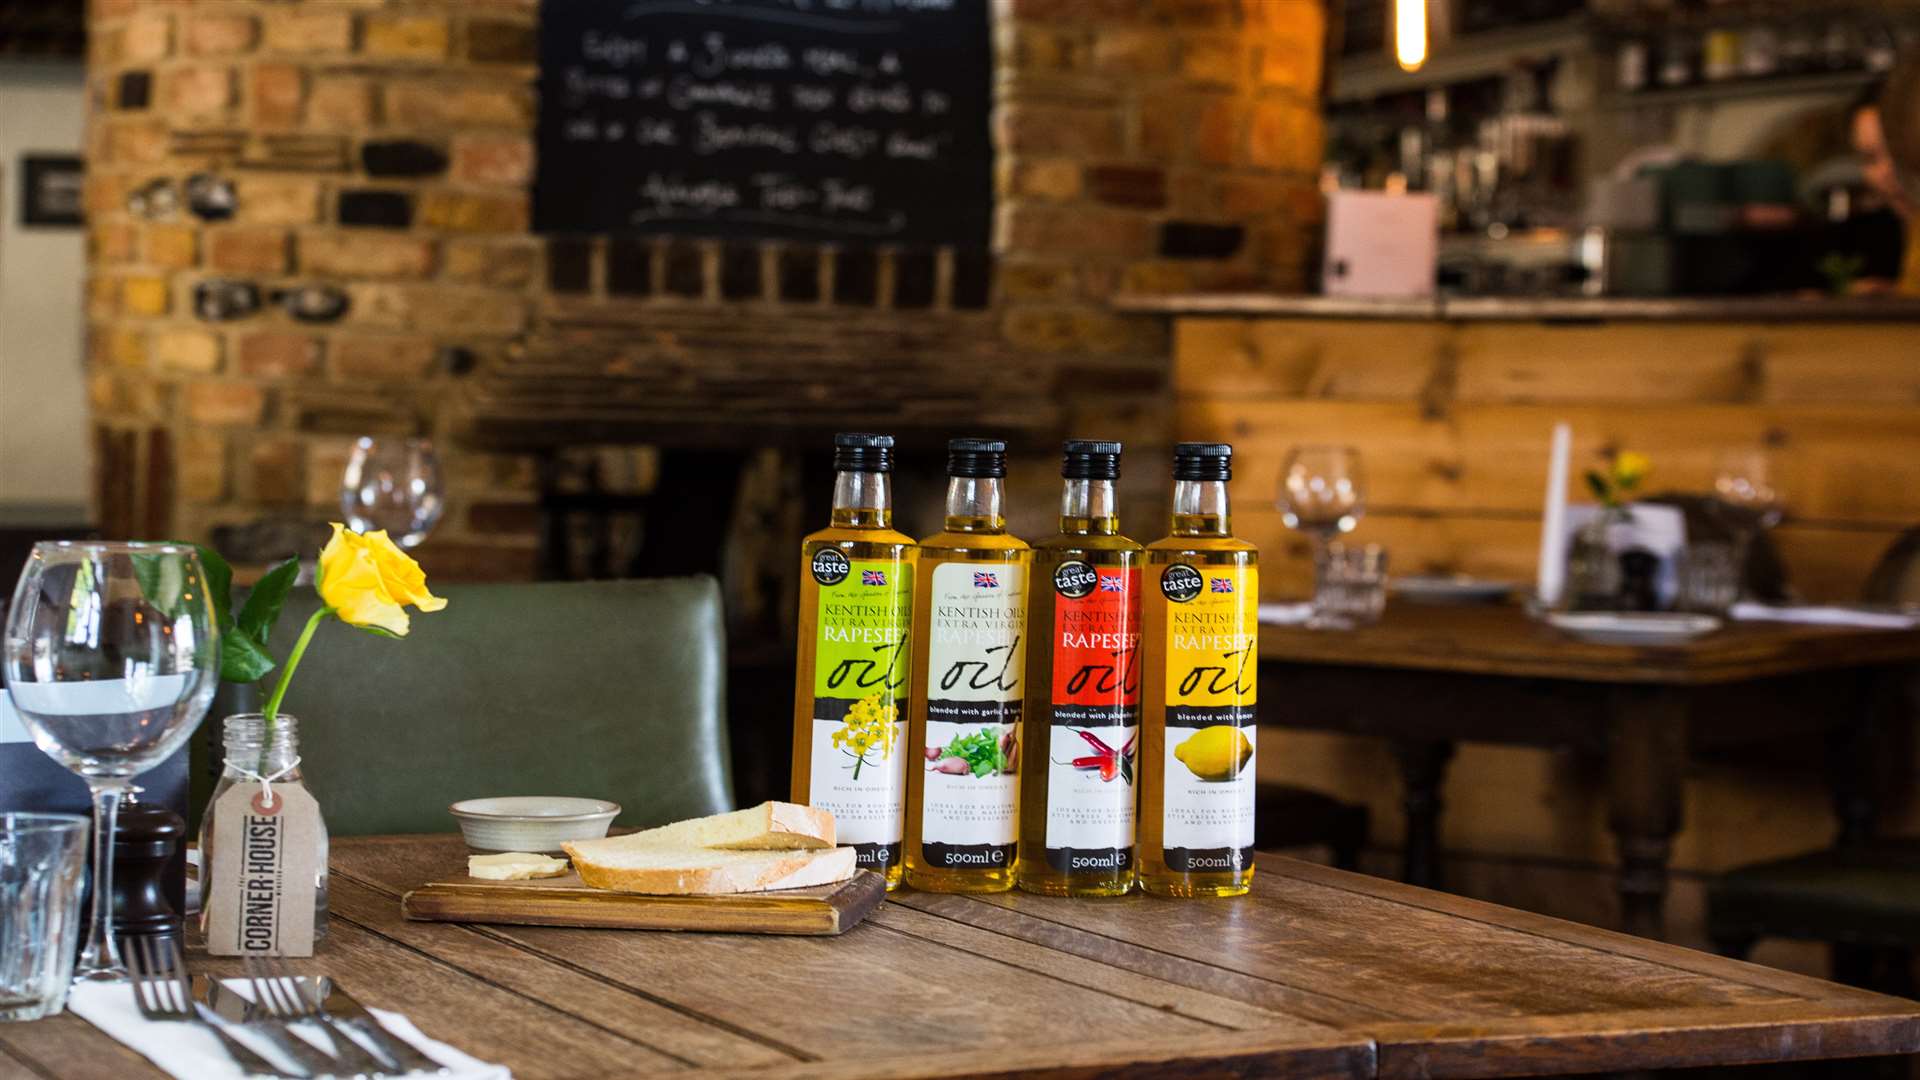 Kentish Oils are harvested, pressed and bottled at a farm in Birchington